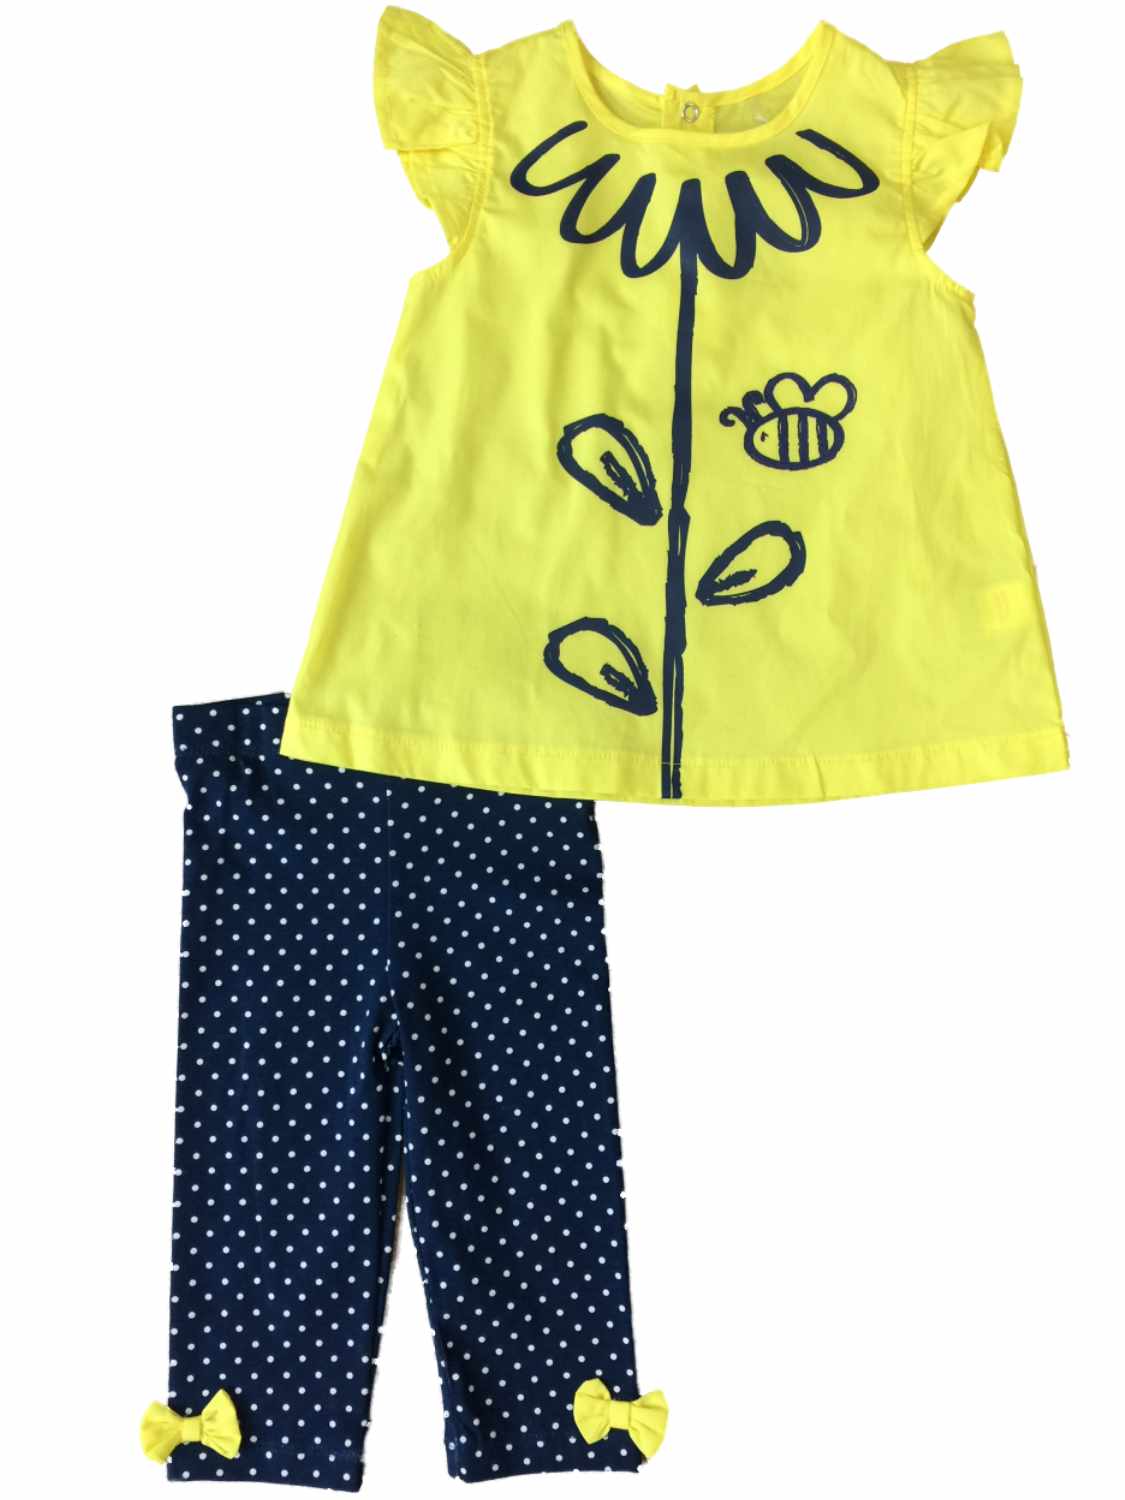 Fisher-Price Infant Toddler Girls Yellow & Navy Daisy Bee Outfit 2 Piece Polka Dot Outfit